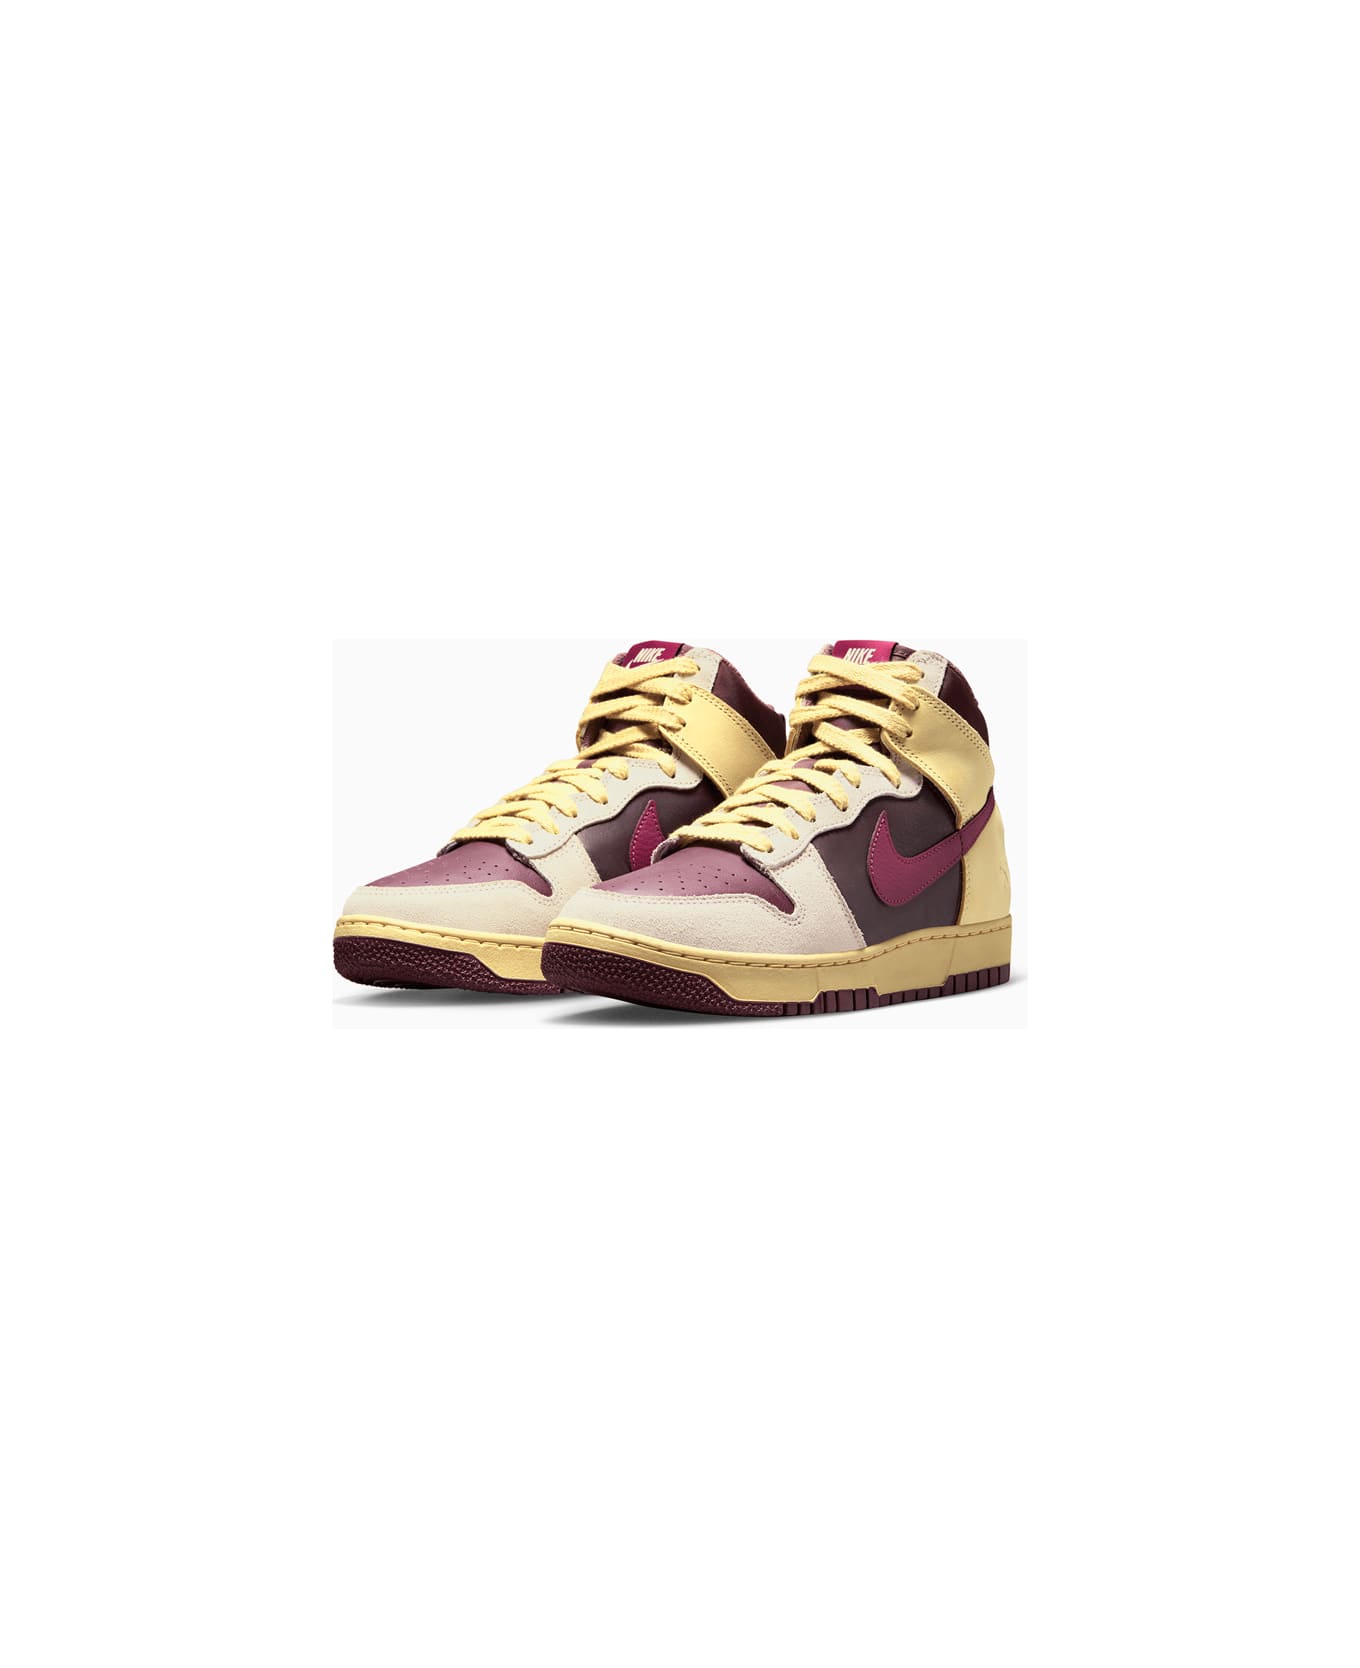 Nike Dunk High 1985 Sneakers Fd0794-700 - Multiple colors スニーカー